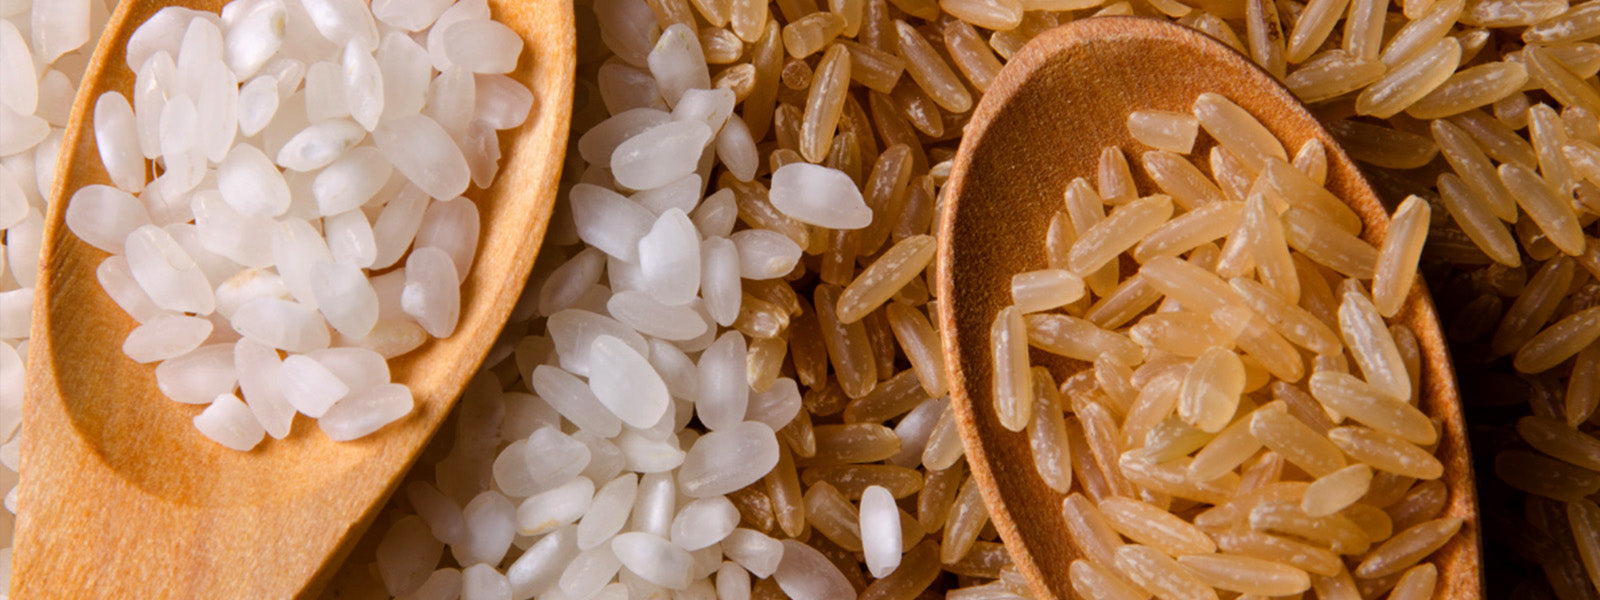 Brown rice or white rice, which is more healthy?